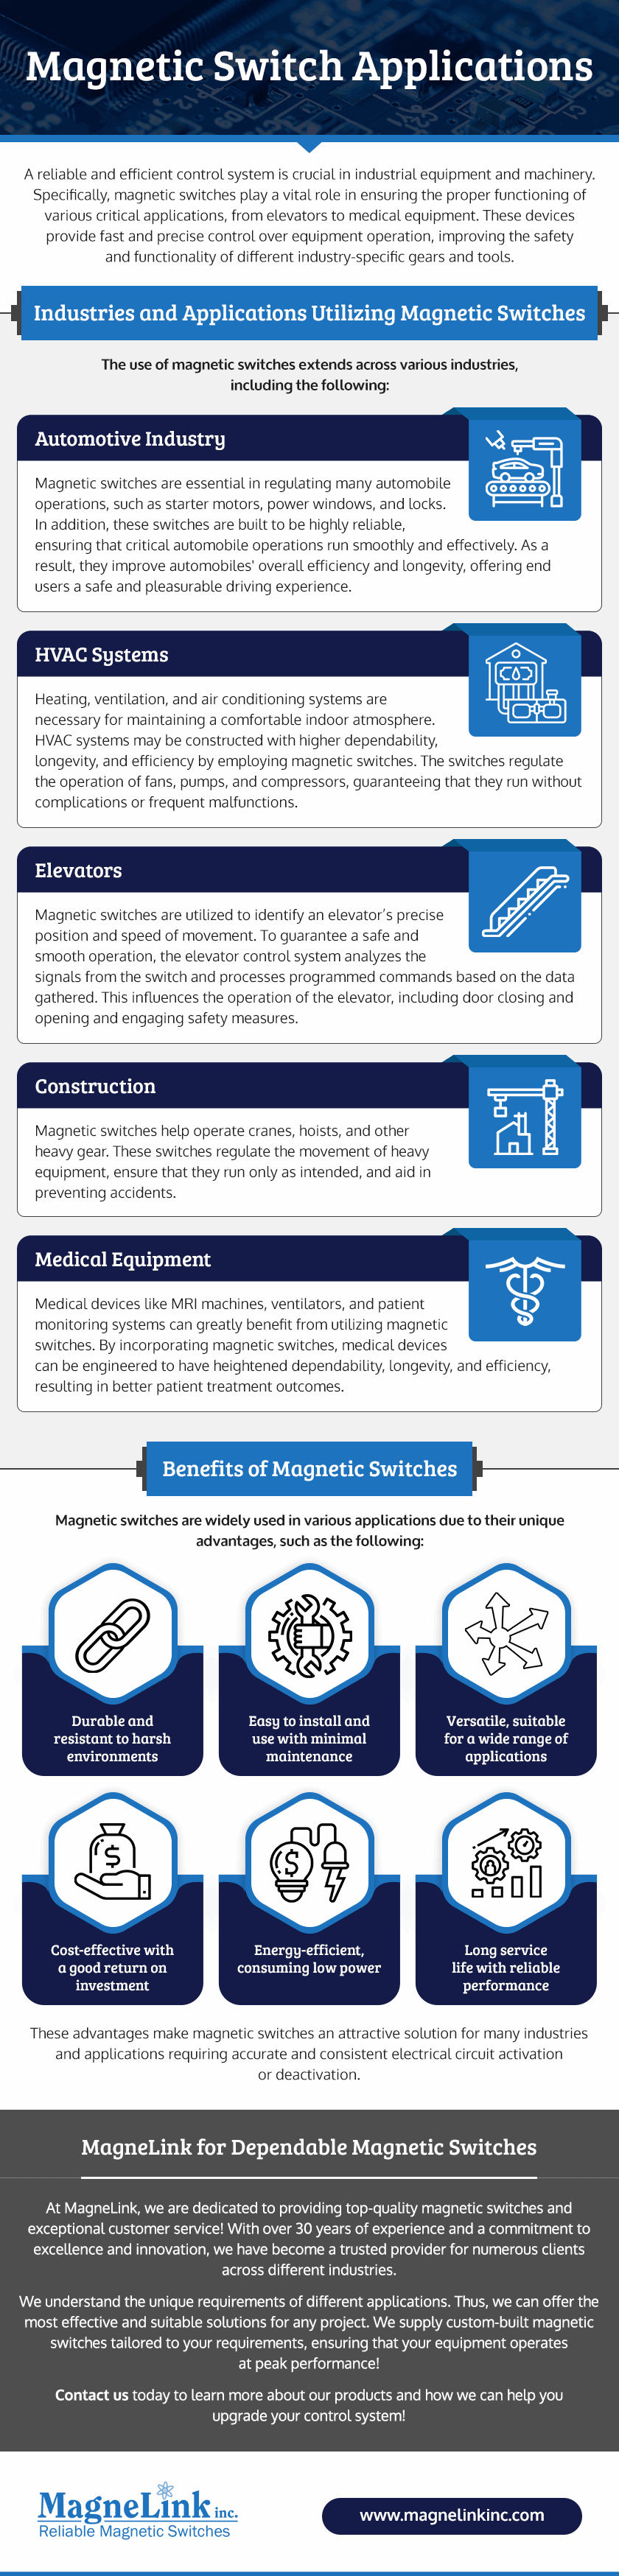 Magnetic-Switch-Applications